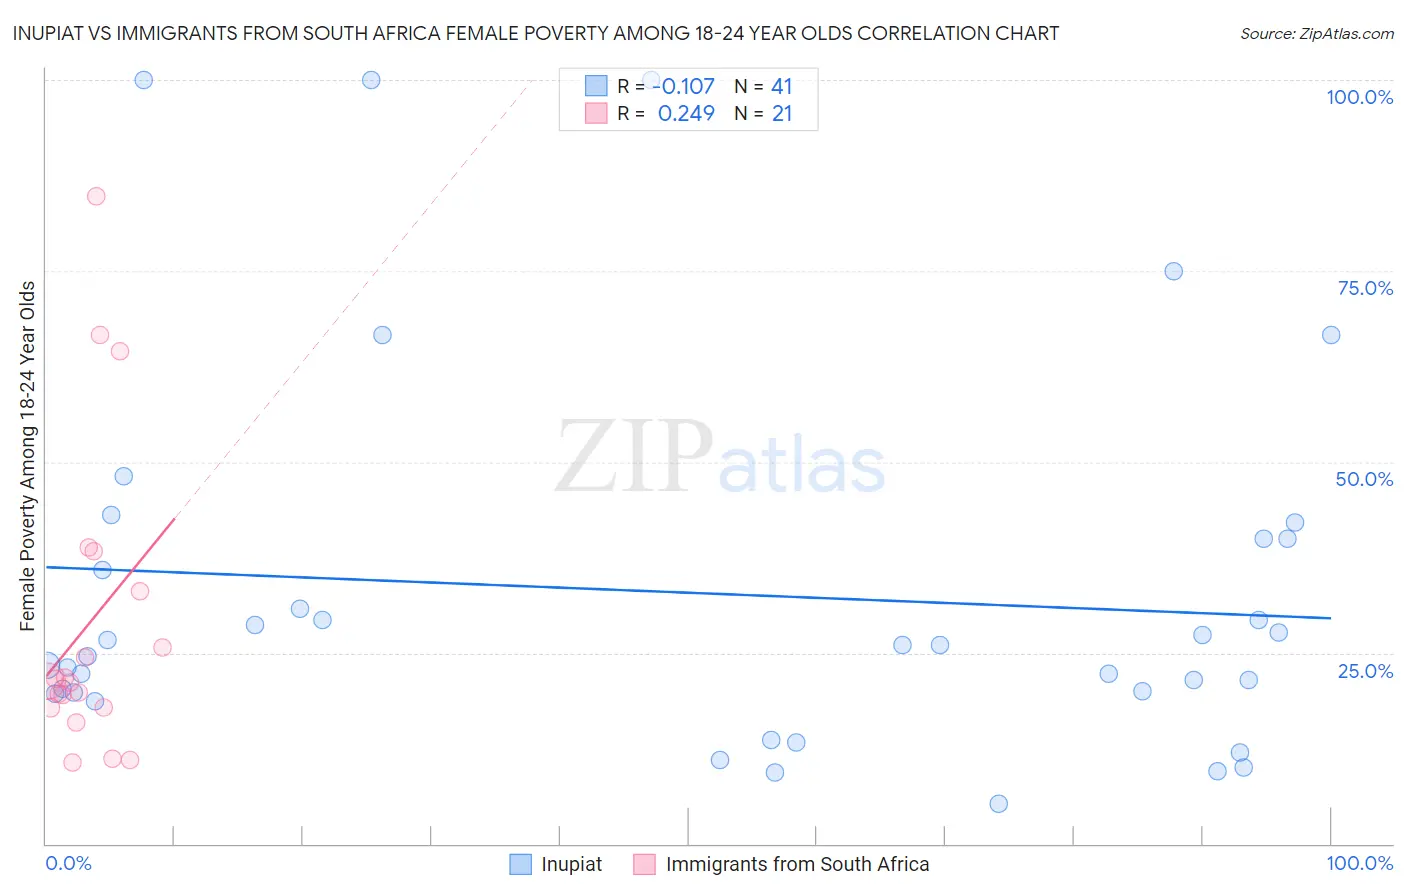 Inupiat vs Immigrants from South Africa Female Poverty Among 18-24 Year Olds